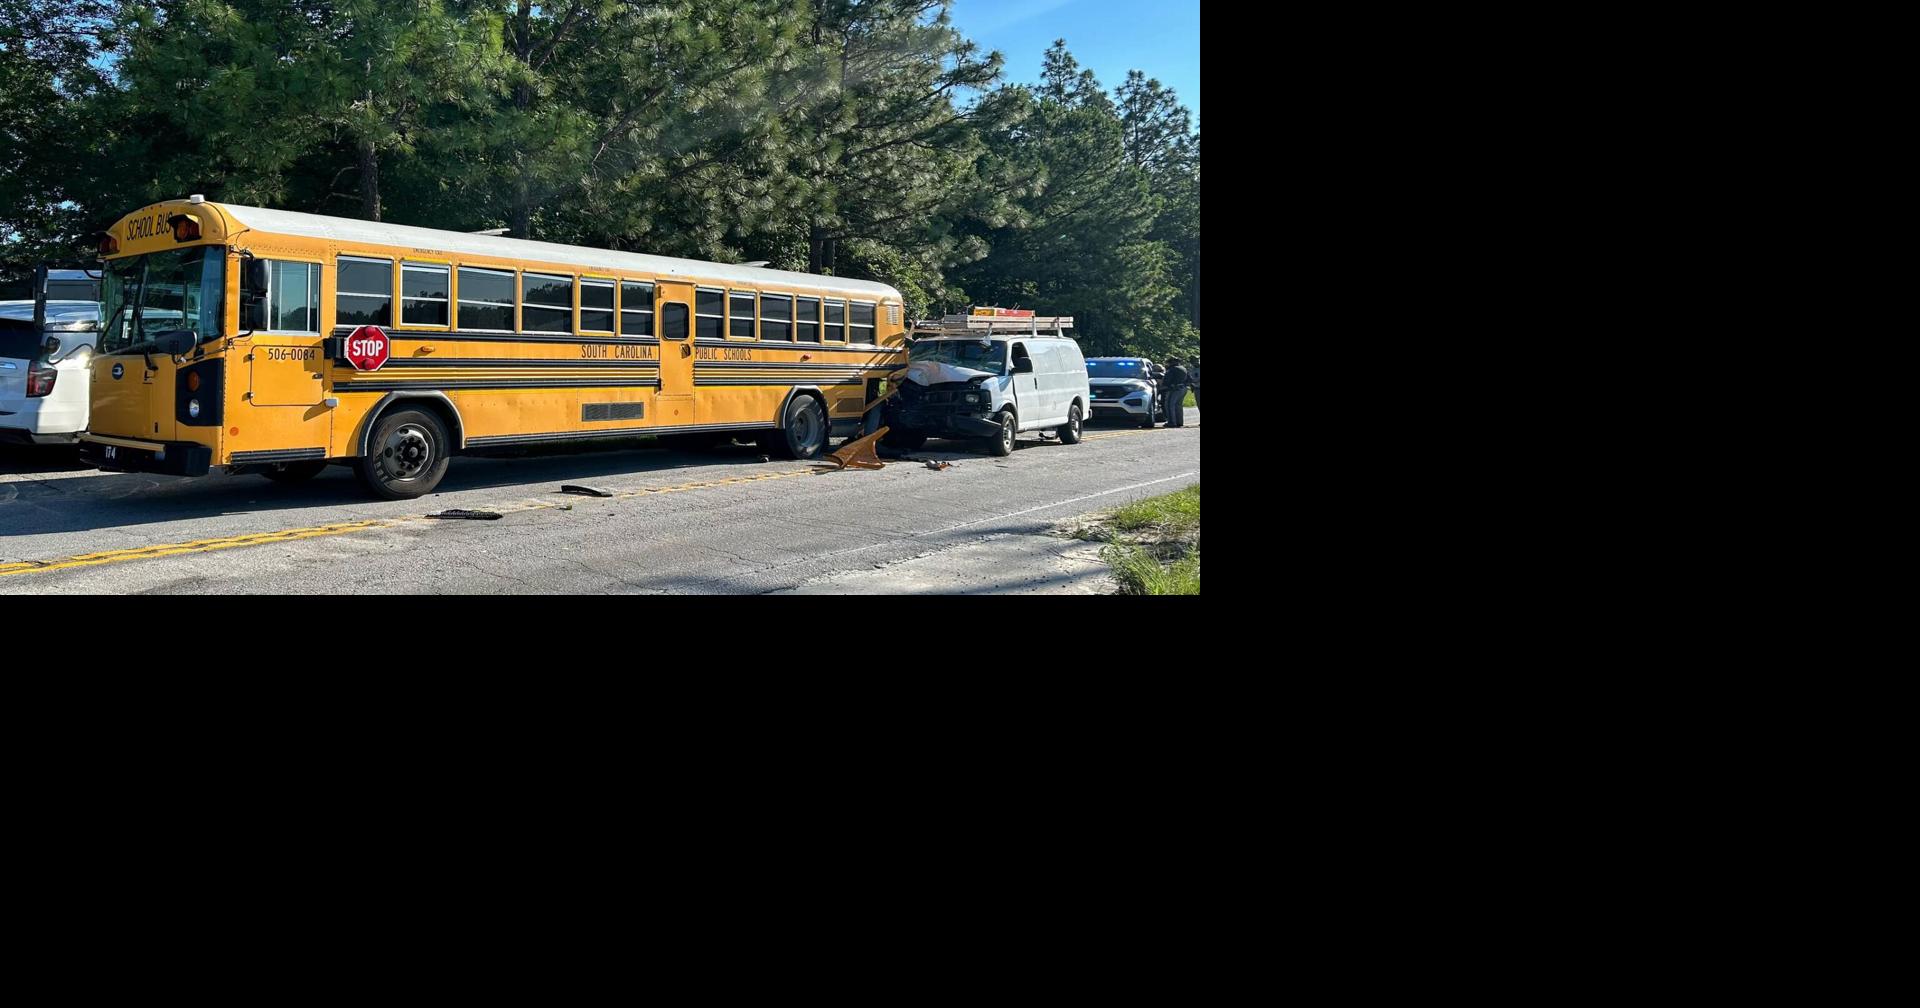 Update on Lexington school bus and motorcycle crash: more charges, ICE detainment – The Post and Courier